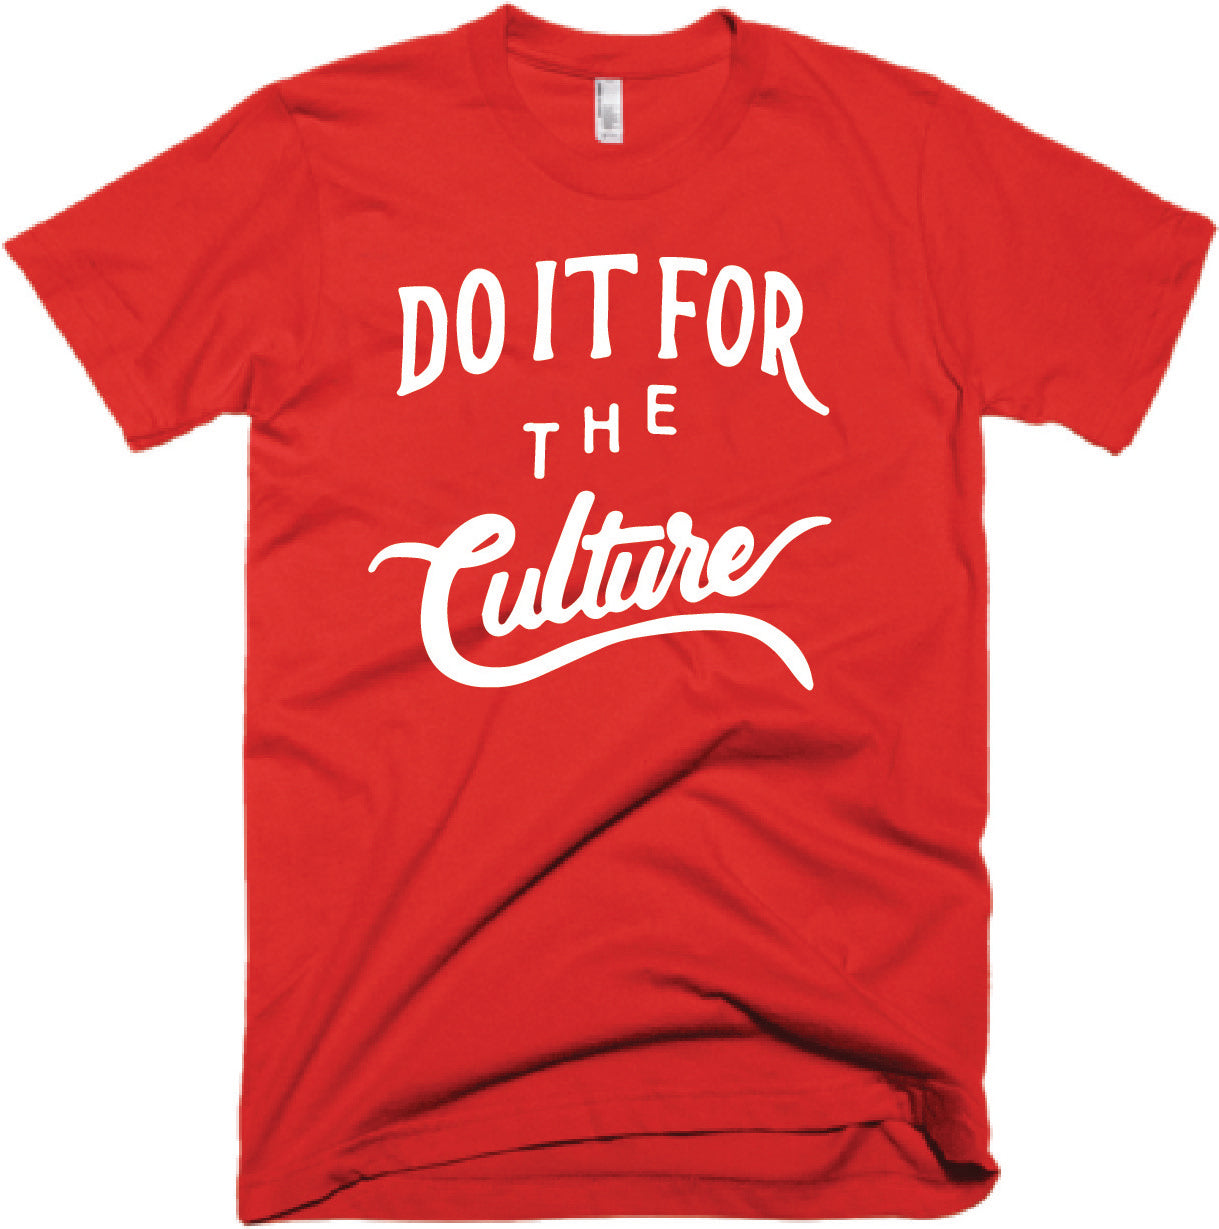 DO IT FOR THE CULTURE- RED - UNISEX FIT